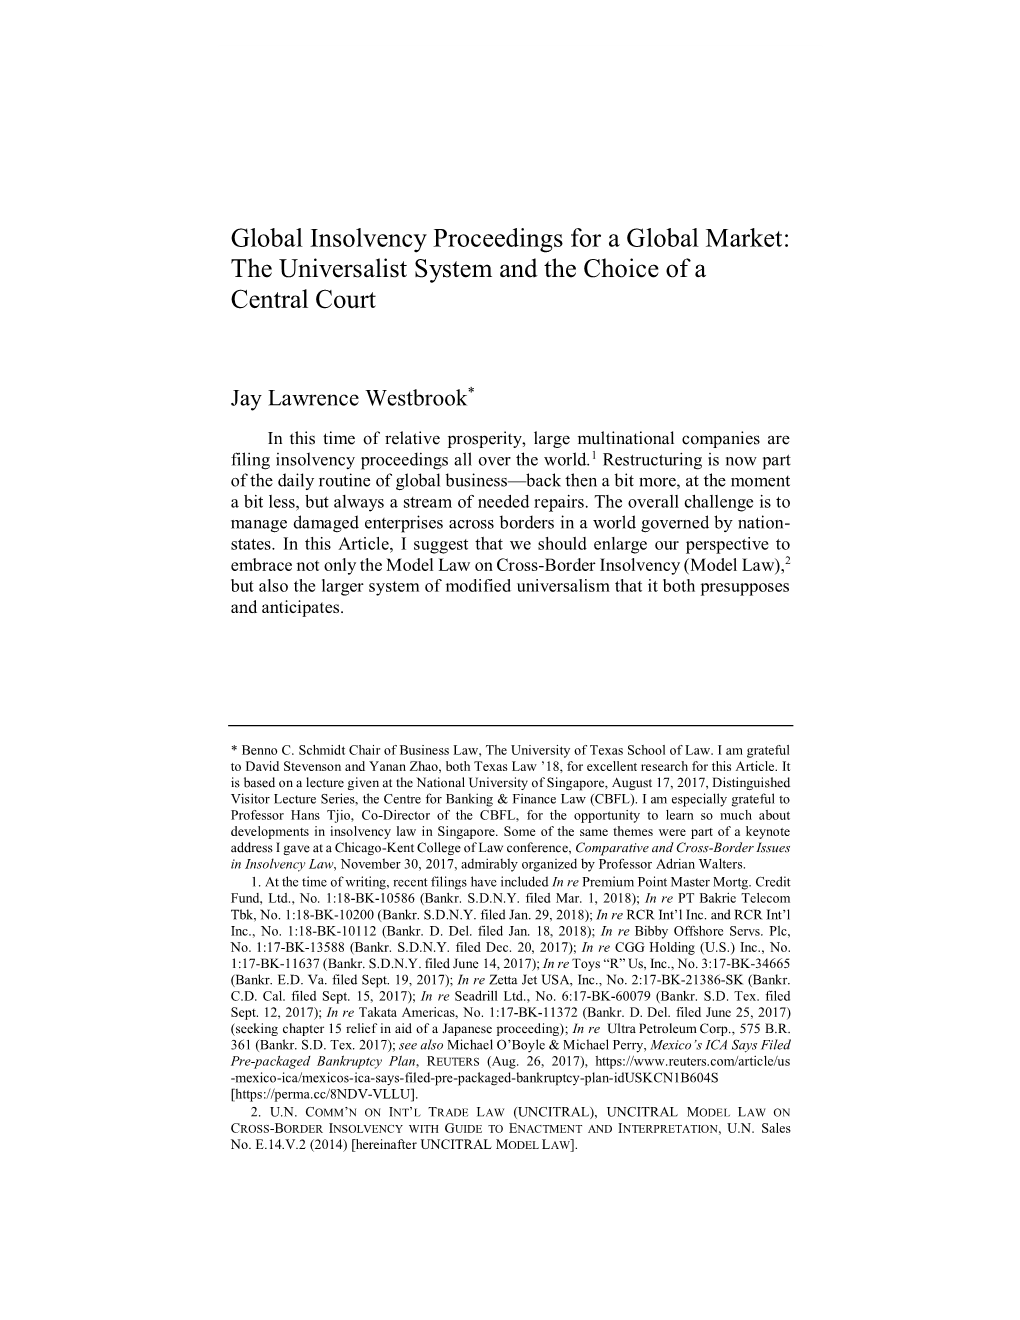 Global Insolvency Proceedings for a Global Market: the Universalist System and the Choice of a Central Court